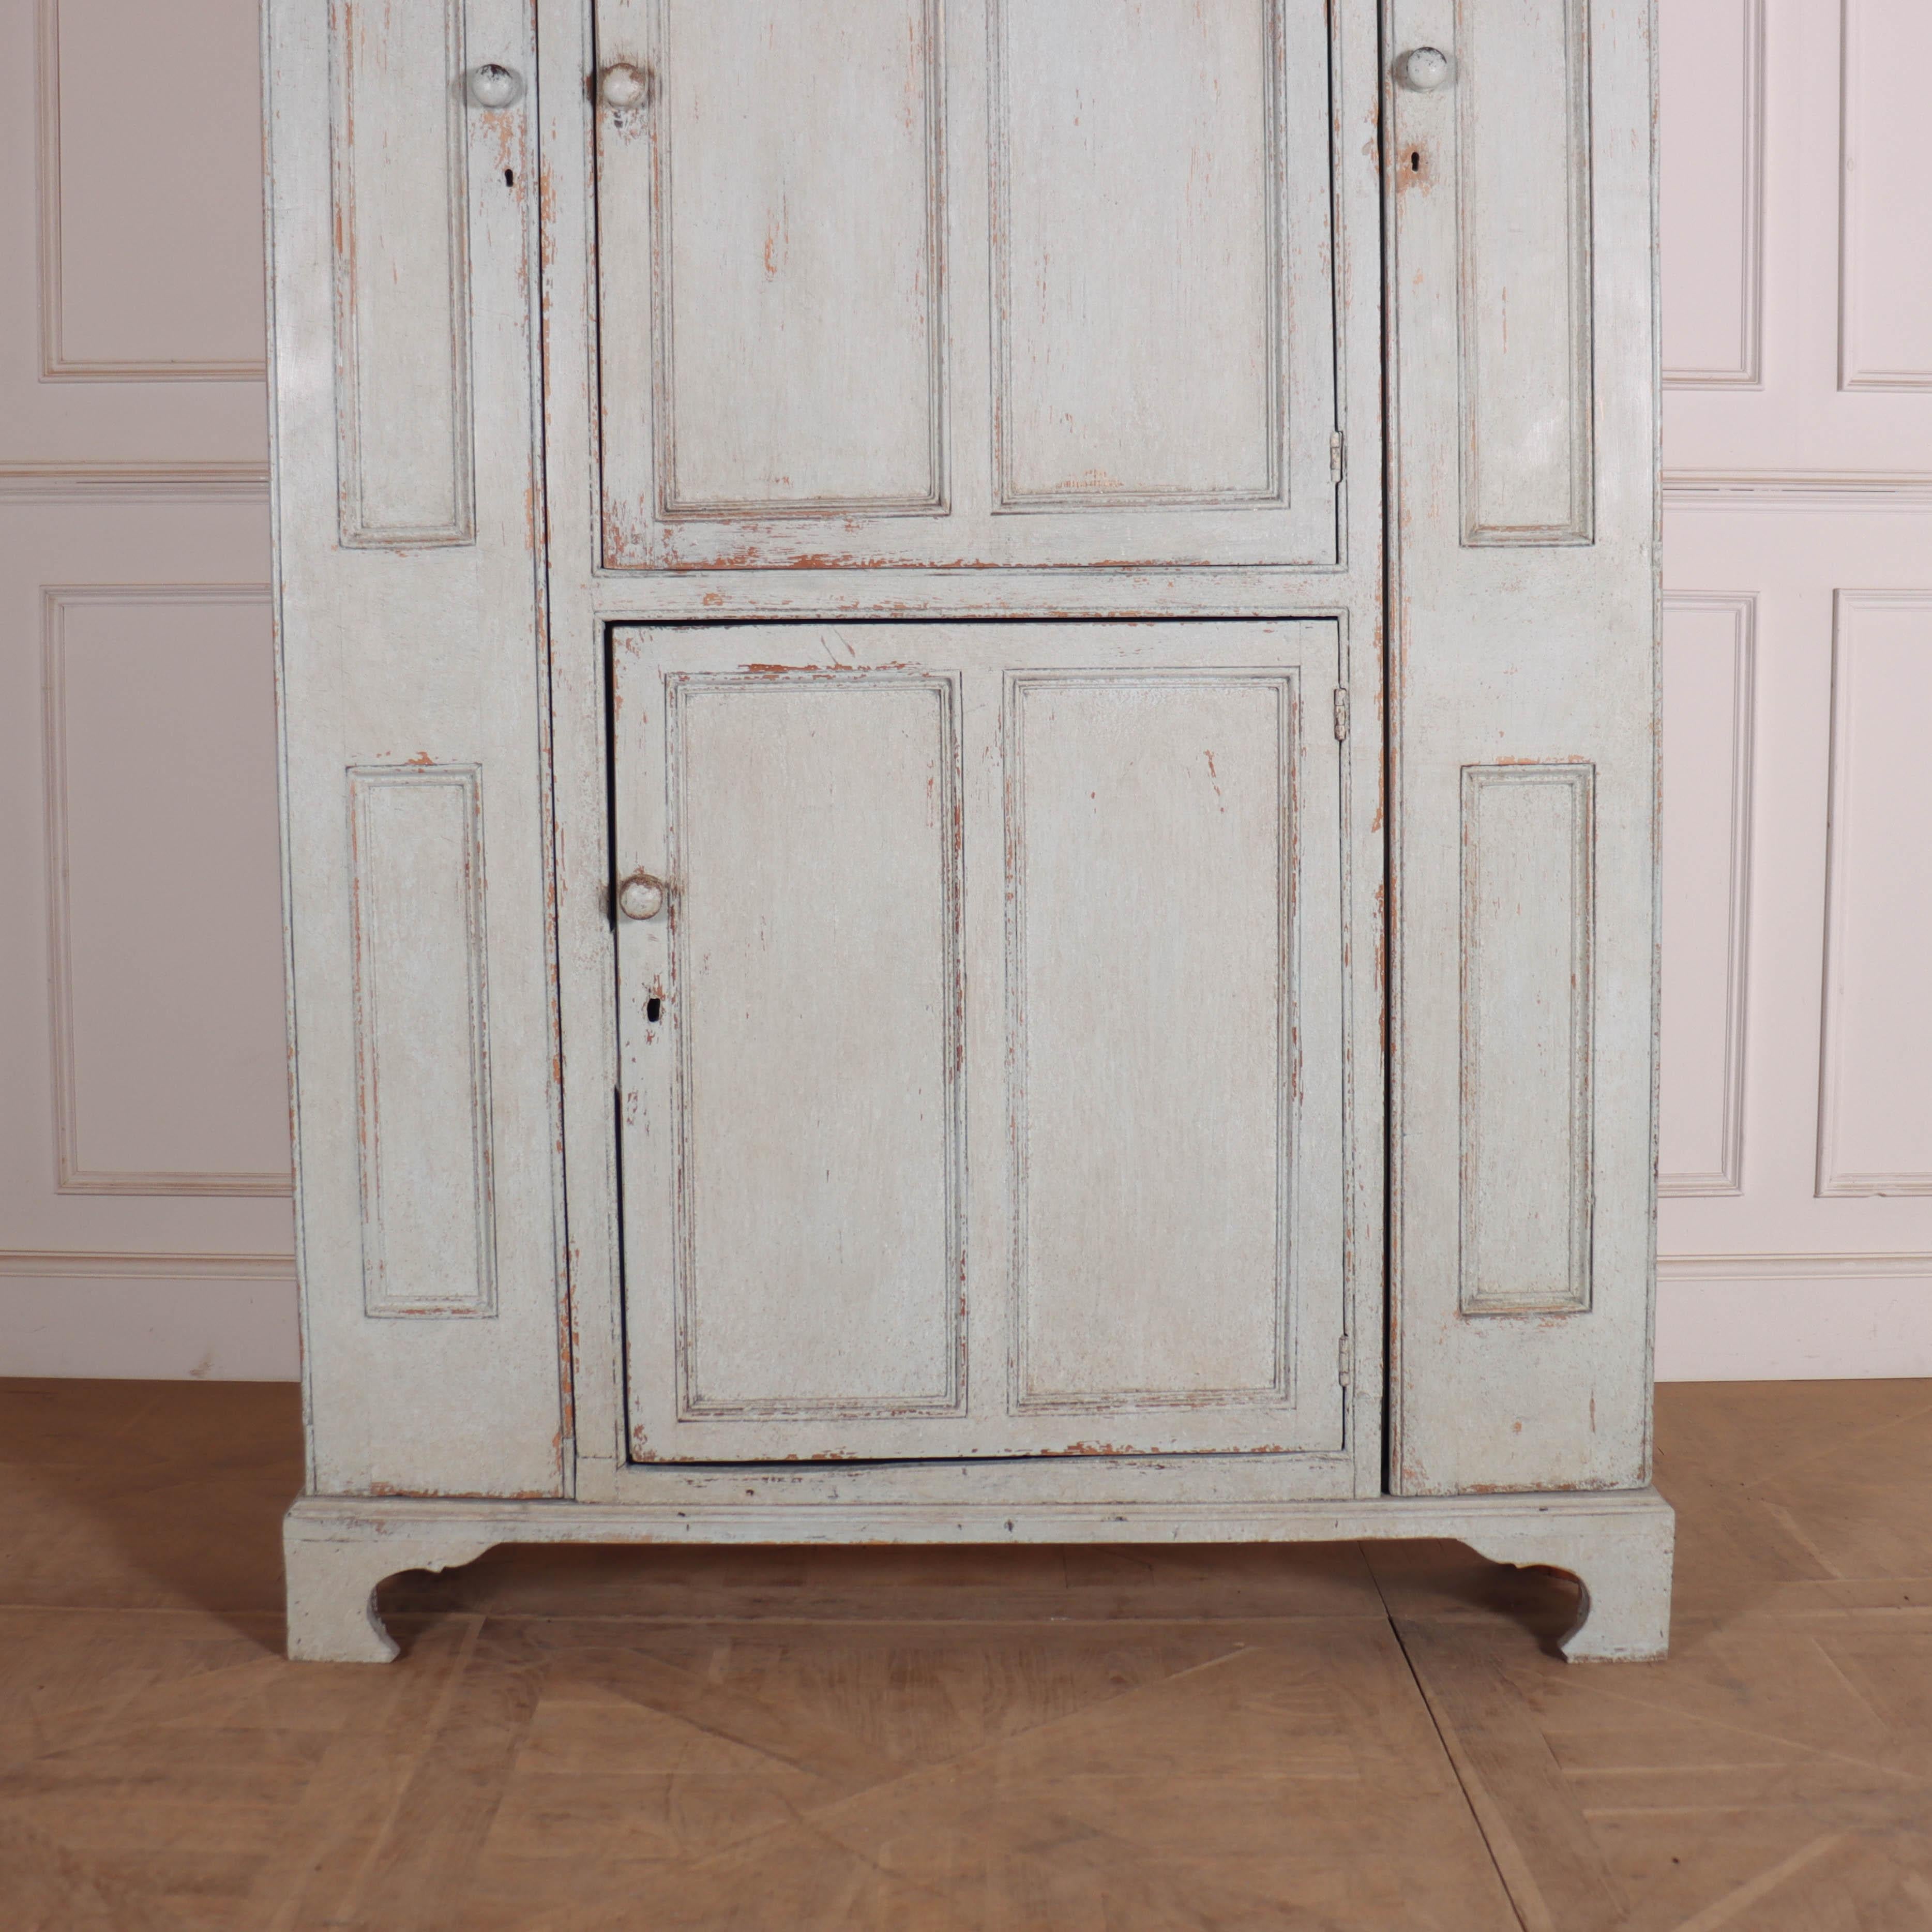 Unusually small 4 door English painted pine housekeepers cupboard. 1810.

Reference: 7839

Dimensions
56.5 inches (144 cms) Wide
14.5 inches (37 cms) Deep
86.5 inches (220 cms) High